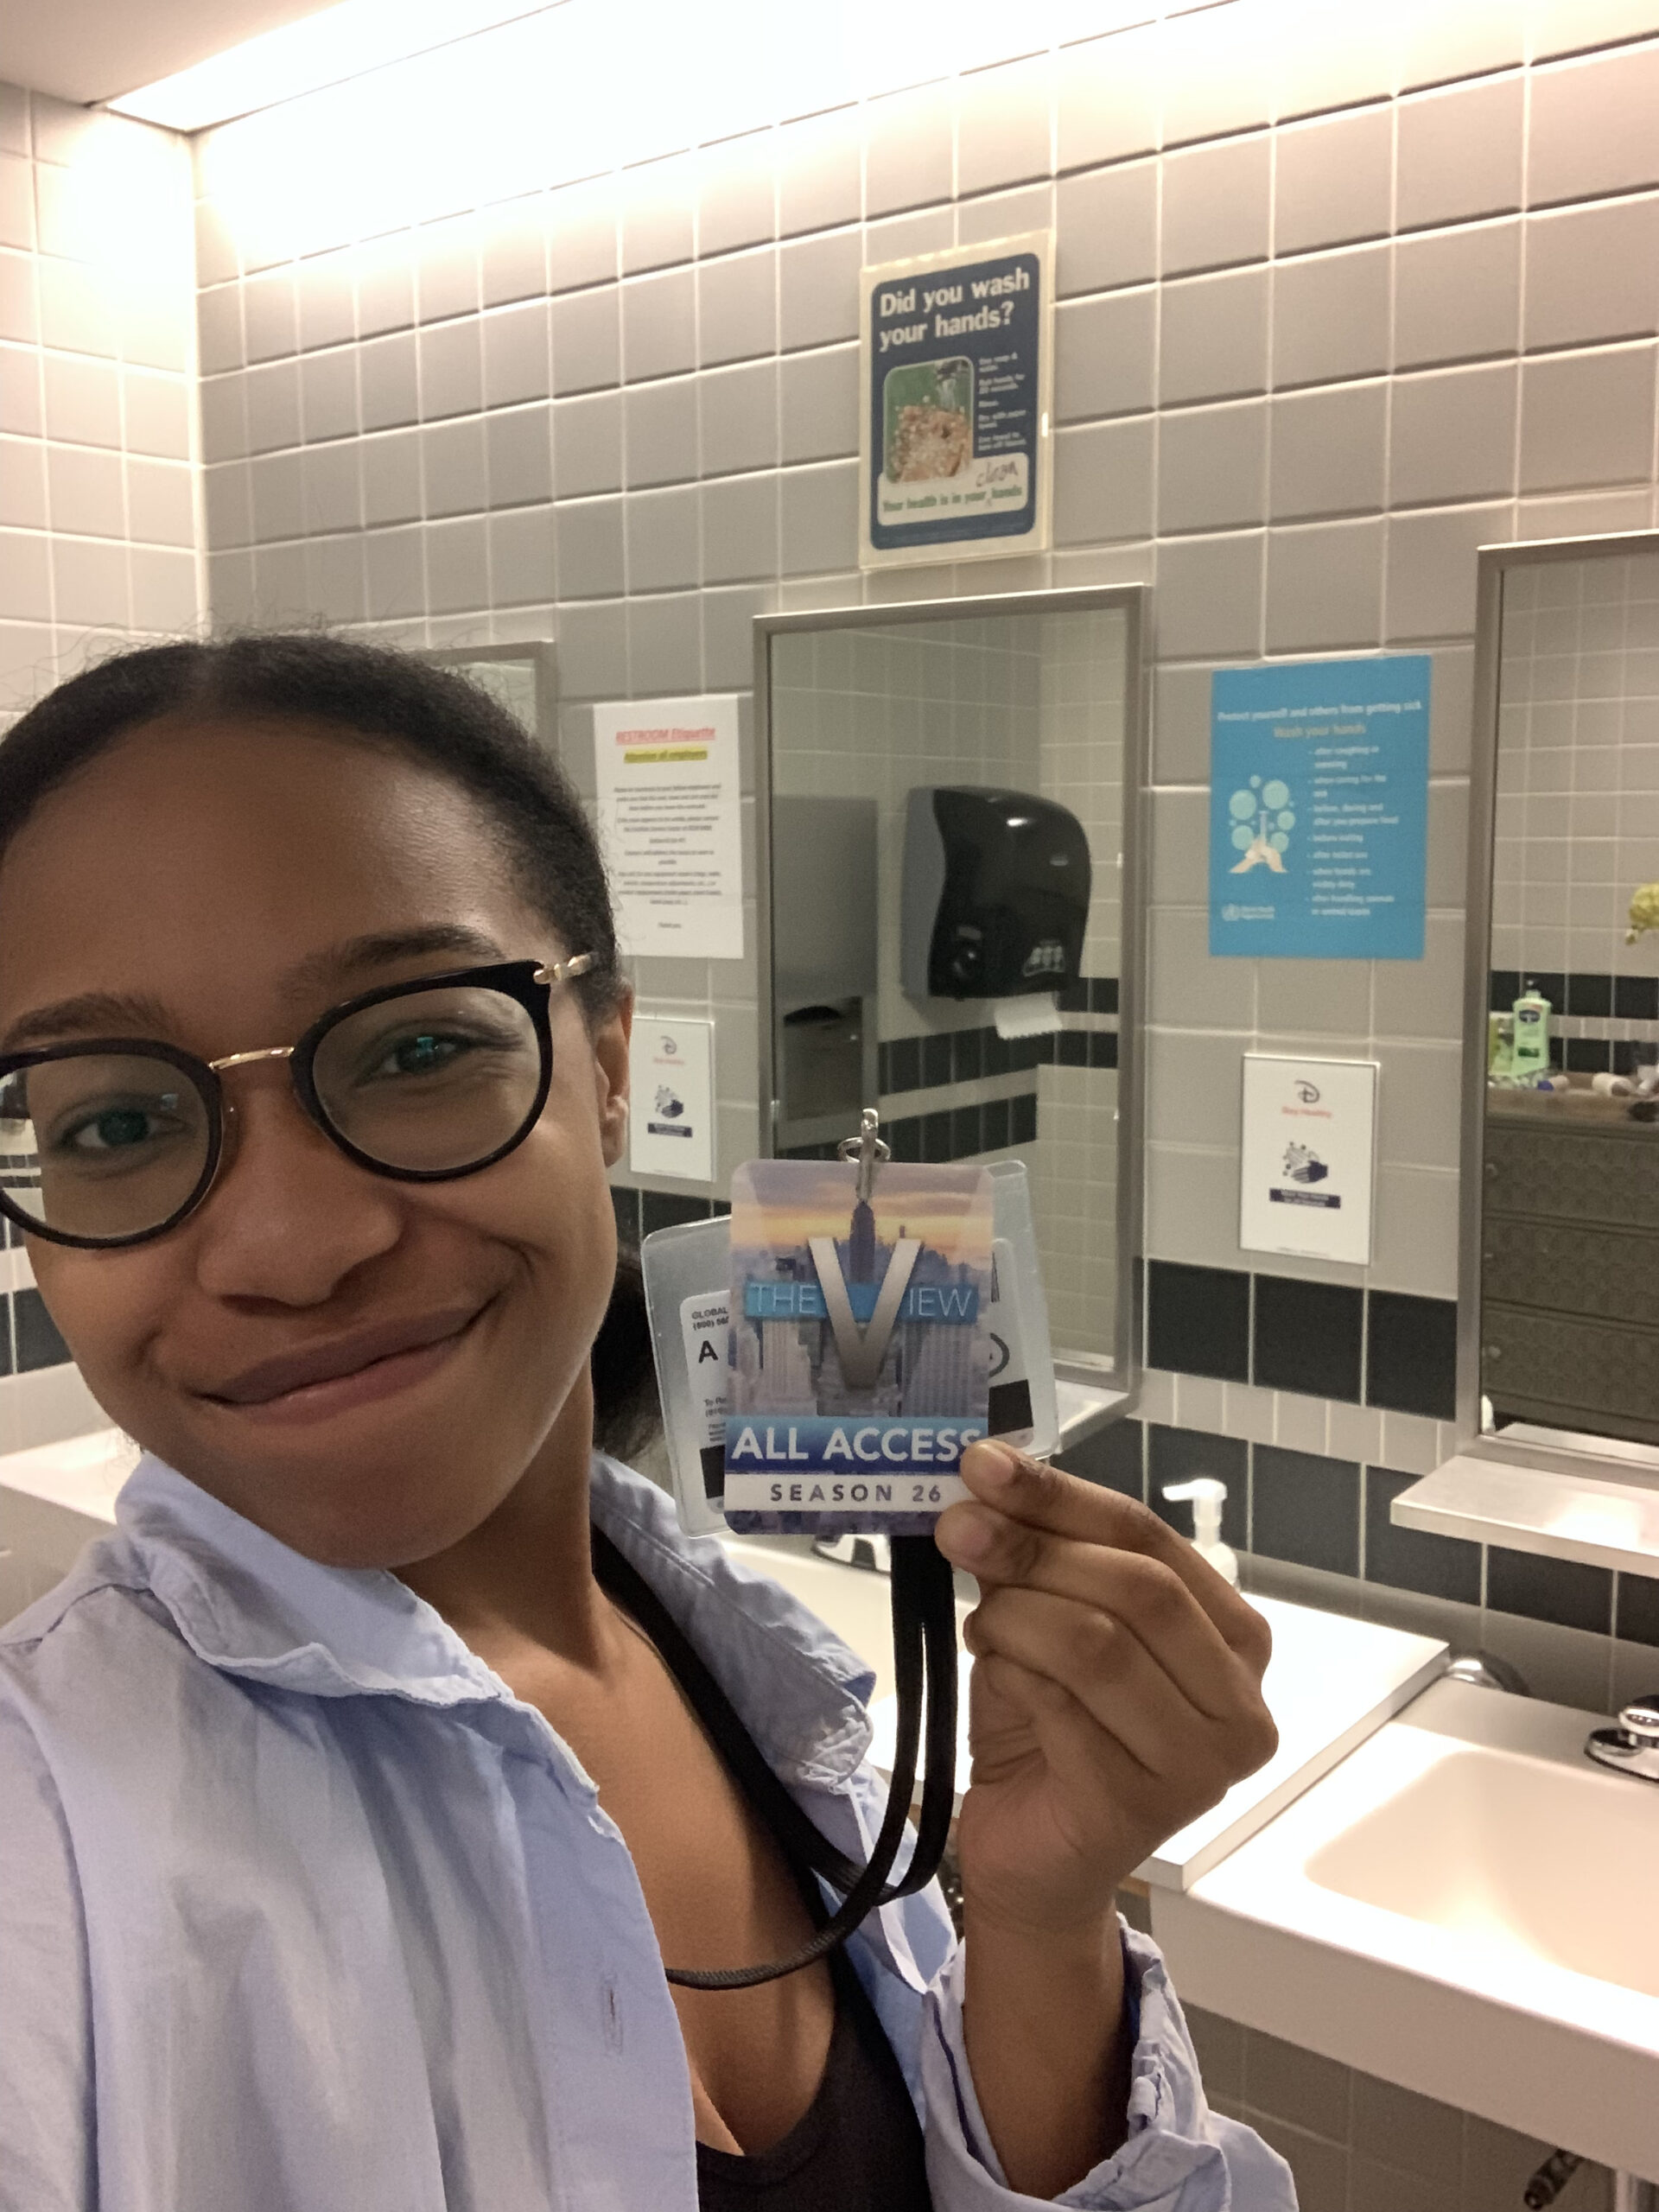 The author smiling in a bathroom while holding up her all access pass to The View.